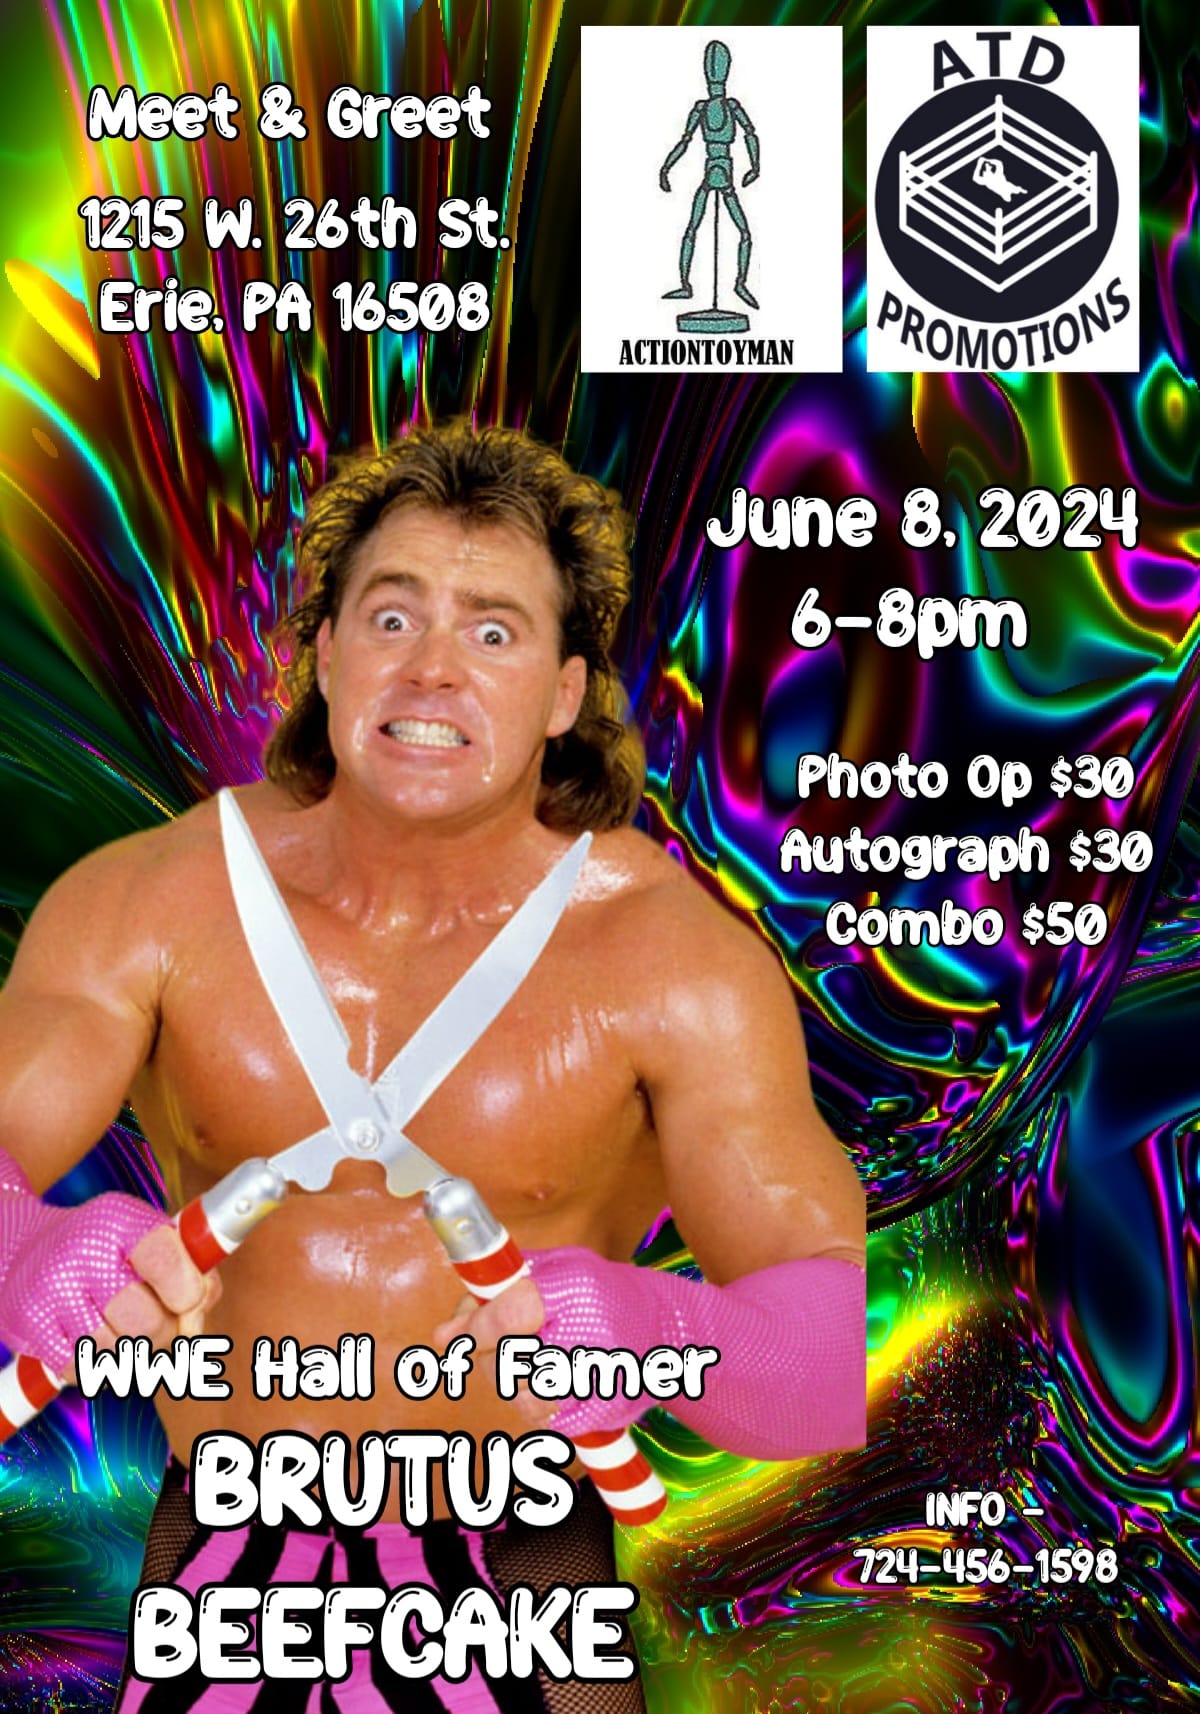 WWE Hall of Famer Meet and Greet at ActionToyMan